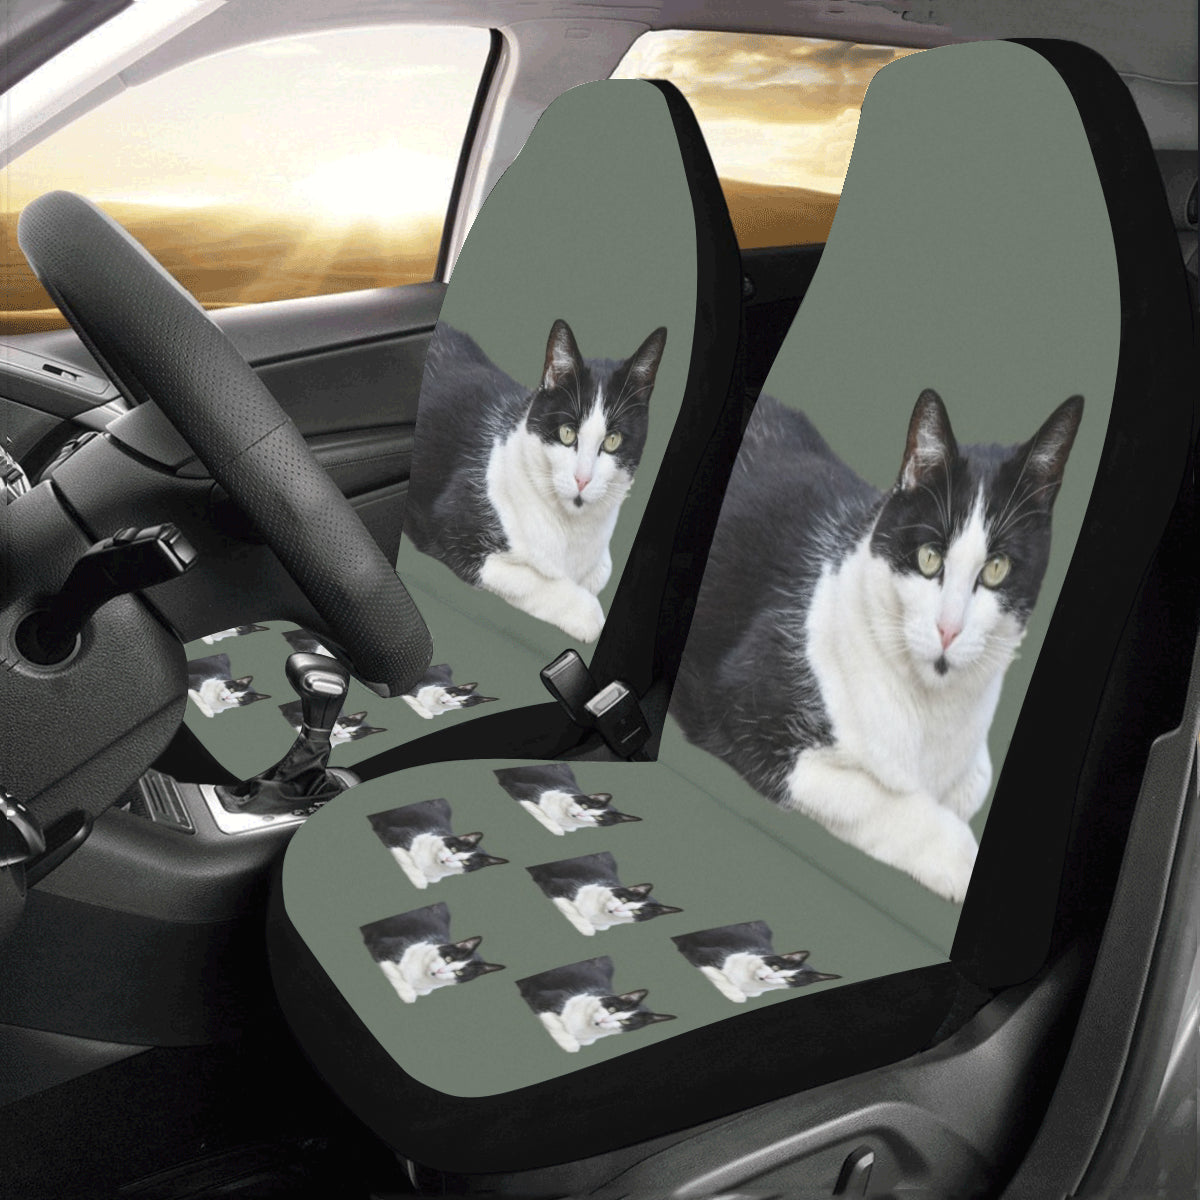 Cat Car Seat Covers - Black & White (Set of 2)